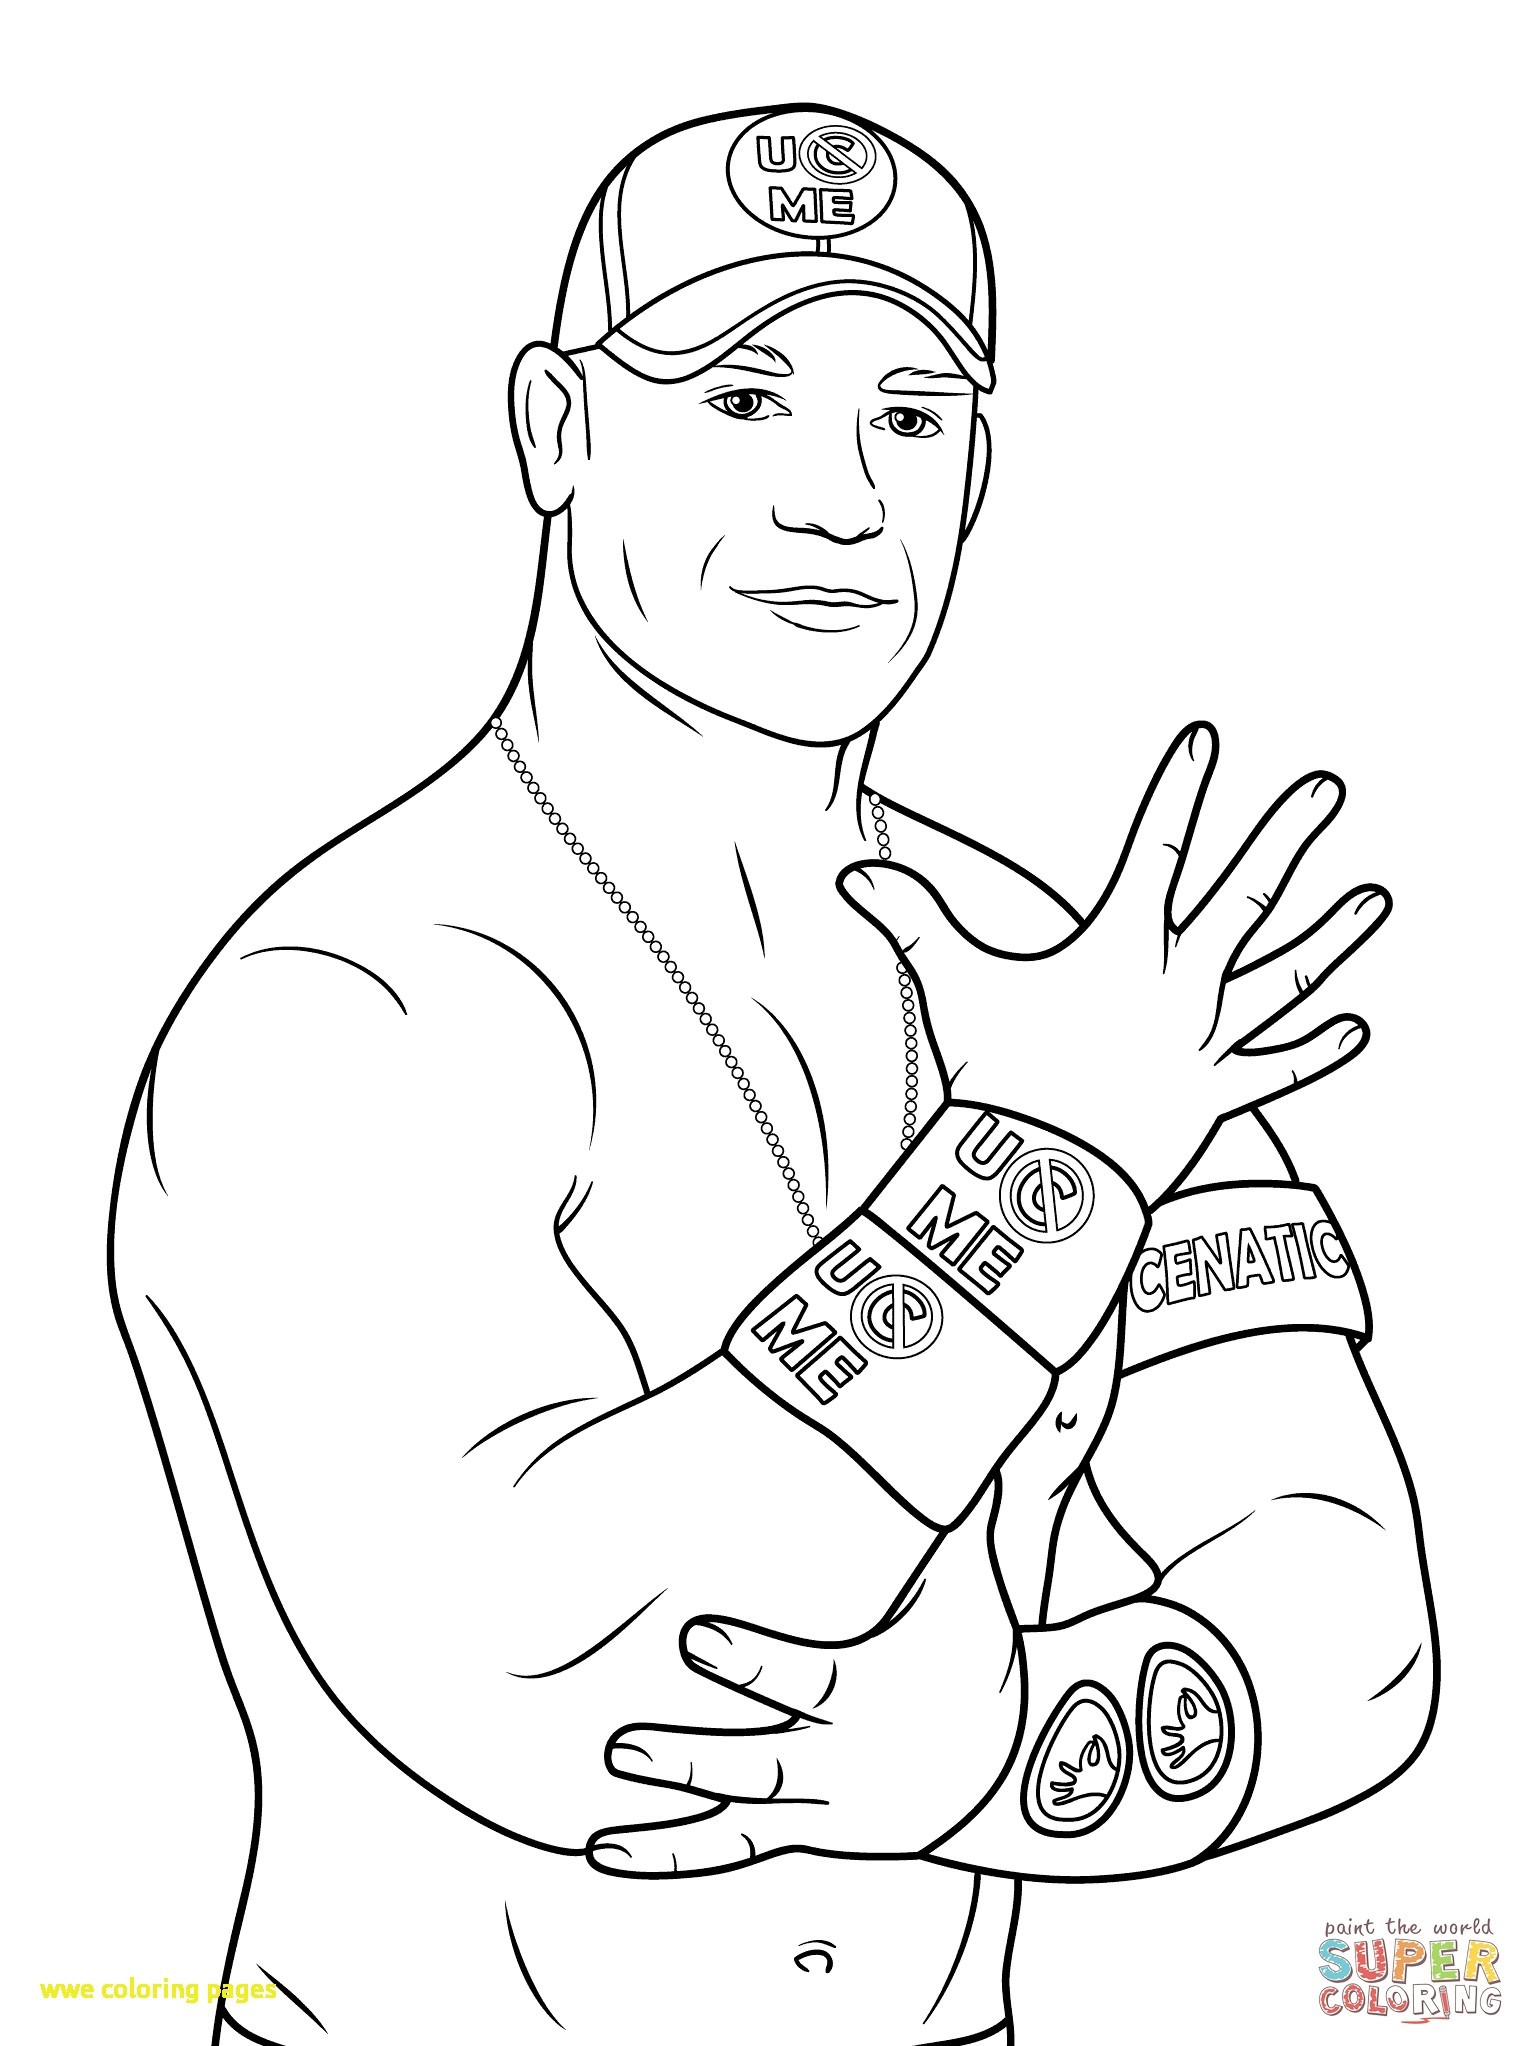 Wwe Ryback Coloring Pages at GetDrawings | Free download